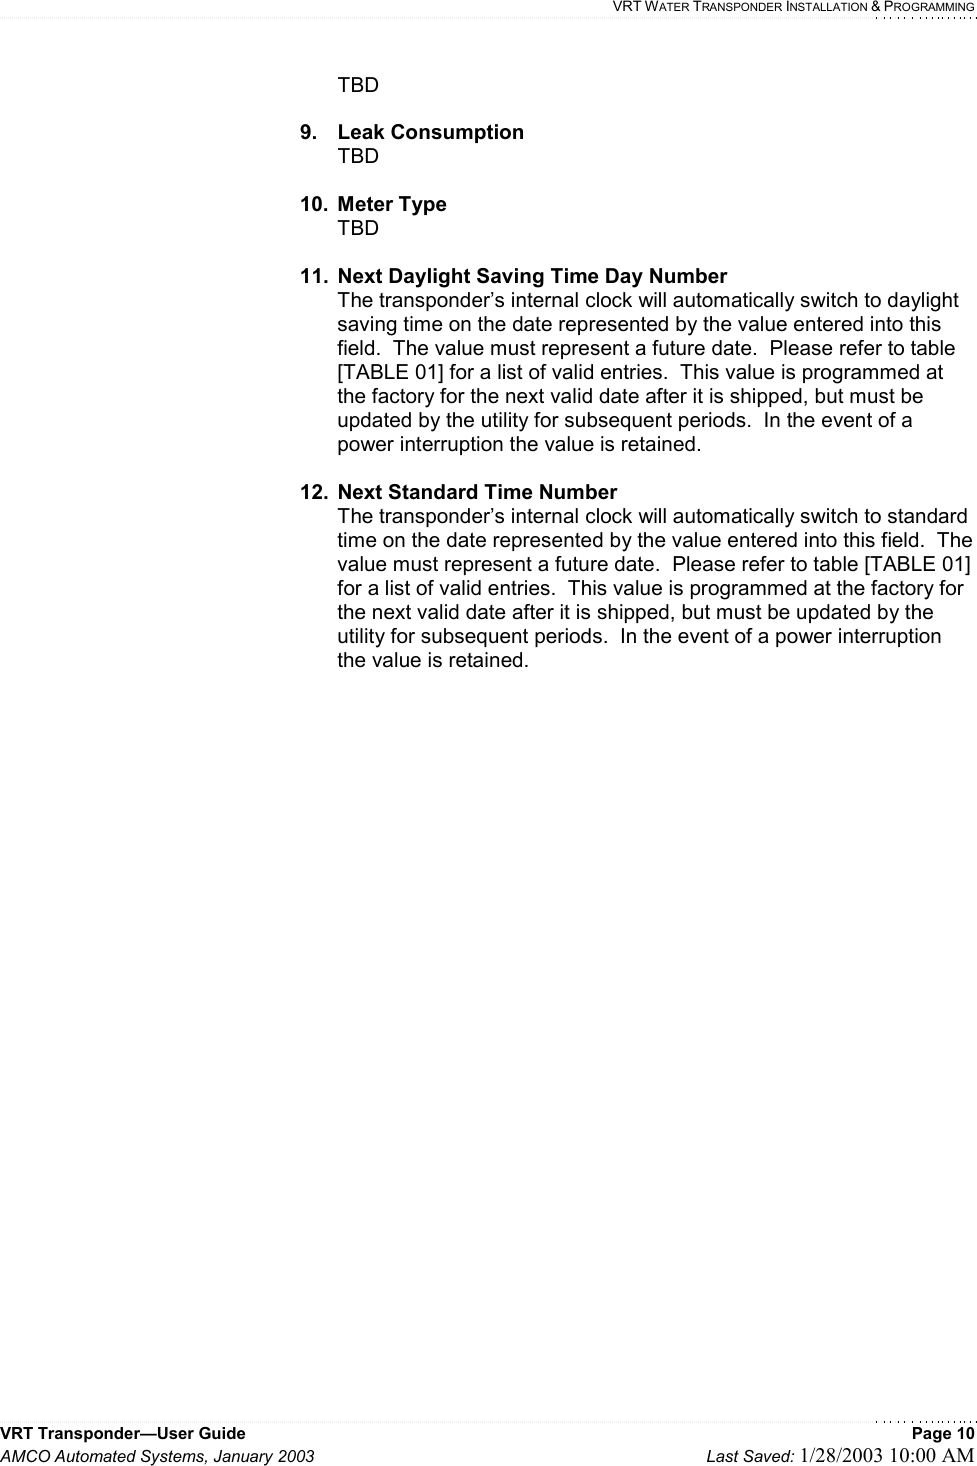    VRT WATER TRANSPONDER INSTALLATION &amp; PROGRAMMING VRT Transponder—User Guide    Page 10 AMCO Automated Systems, January 2003    Last Saved: 1/28/2003 10:00 AM  TBD  9. Leak Consumption TBD  10. Meter Type TBD    11.  Next Daylight Saving Time Day Number  The transponder’s internal clock will automatically switch to daylight saving time on the date represented by the value entered into this field.  The value must represent a future date.  Please refer to table [TABLE 01] for a list of valid entries.  This value is programmed at the factory for the next valid date after it is shipped, but must be updated by the utility for subsequent periods.  In the event of a power interruption the value is retained.  12.  Next Standard Time Number  The transponder’s internal clock will automatically switch to standard time on the date represented by the value entered into this field.  The value must represent a future date.  Please refer to table [TABLE 01] for a list of valid entries.  This value is programmed at the factory for the next valid date after it is shipped, but must be updated by the utility for subsequent periods.  In the event of a power interruption the value is retained.    